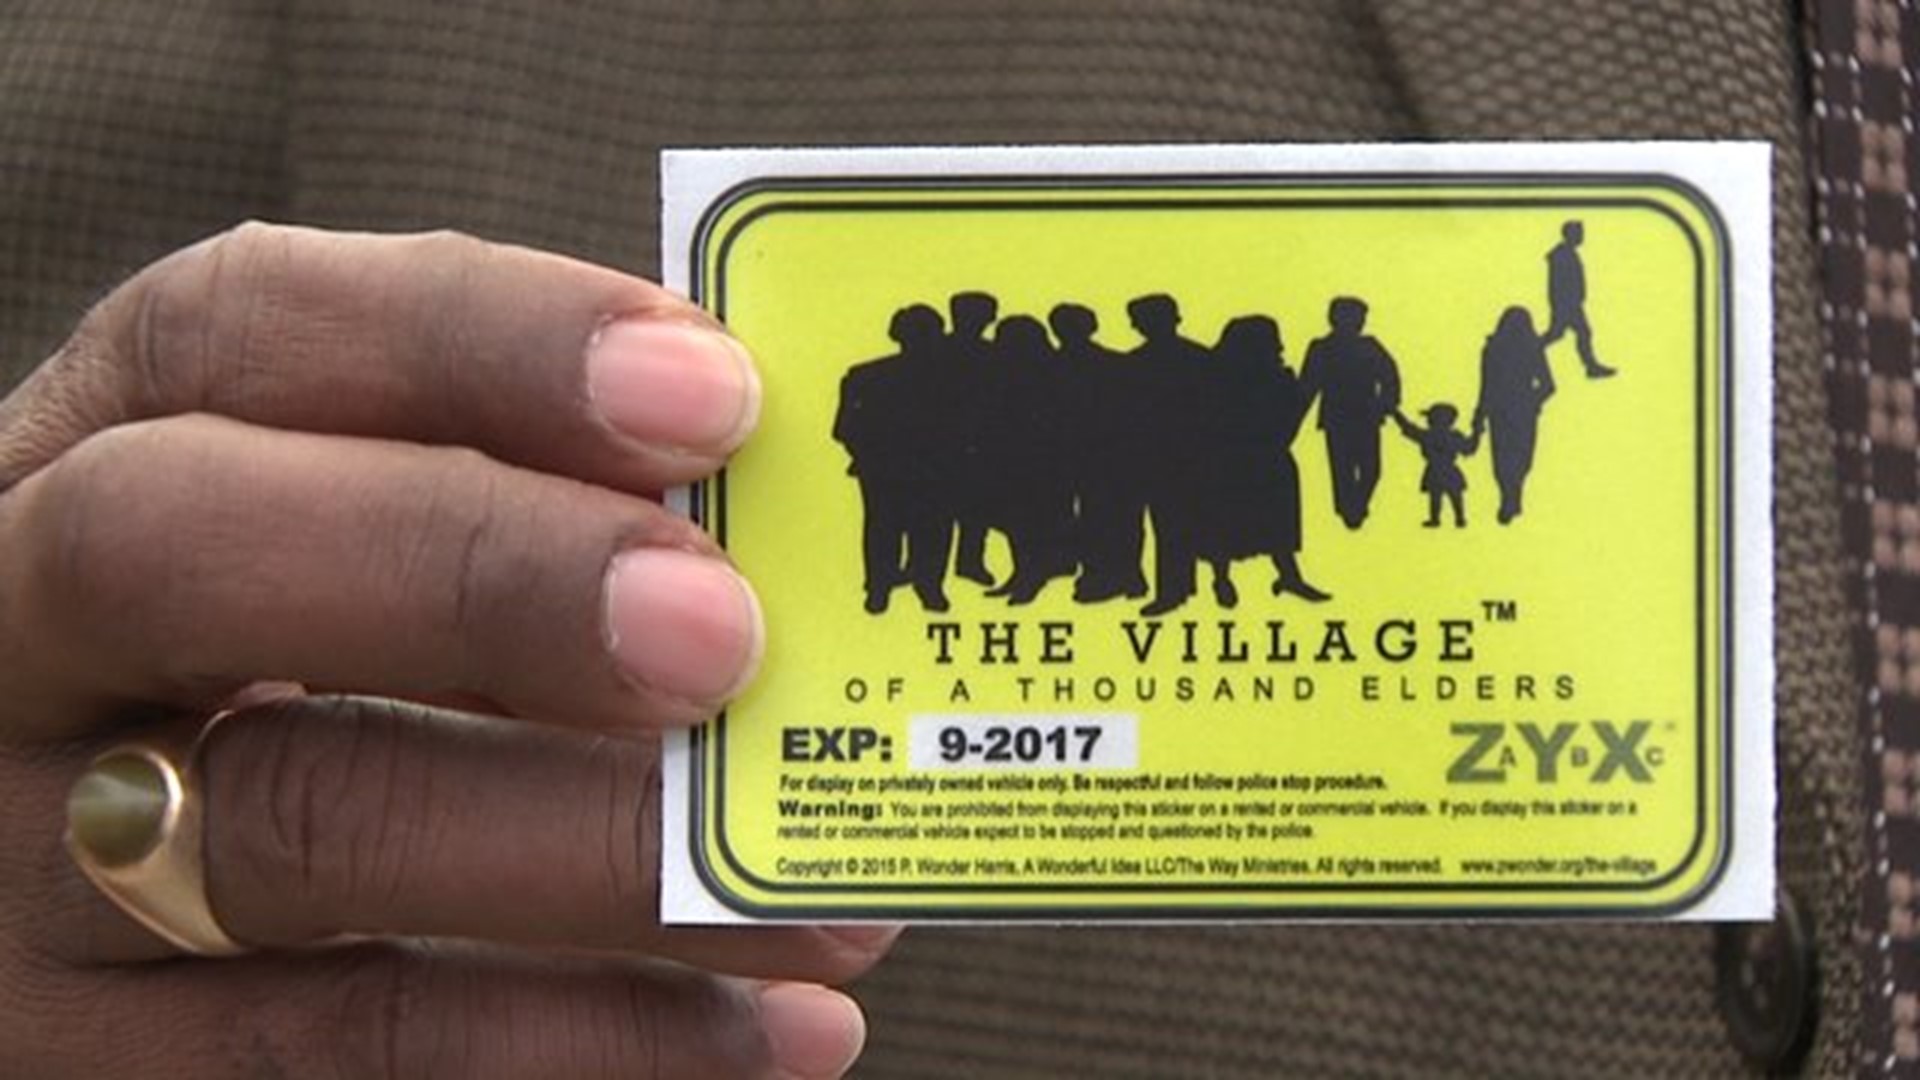 Community organization hopes stickers ease police tensions